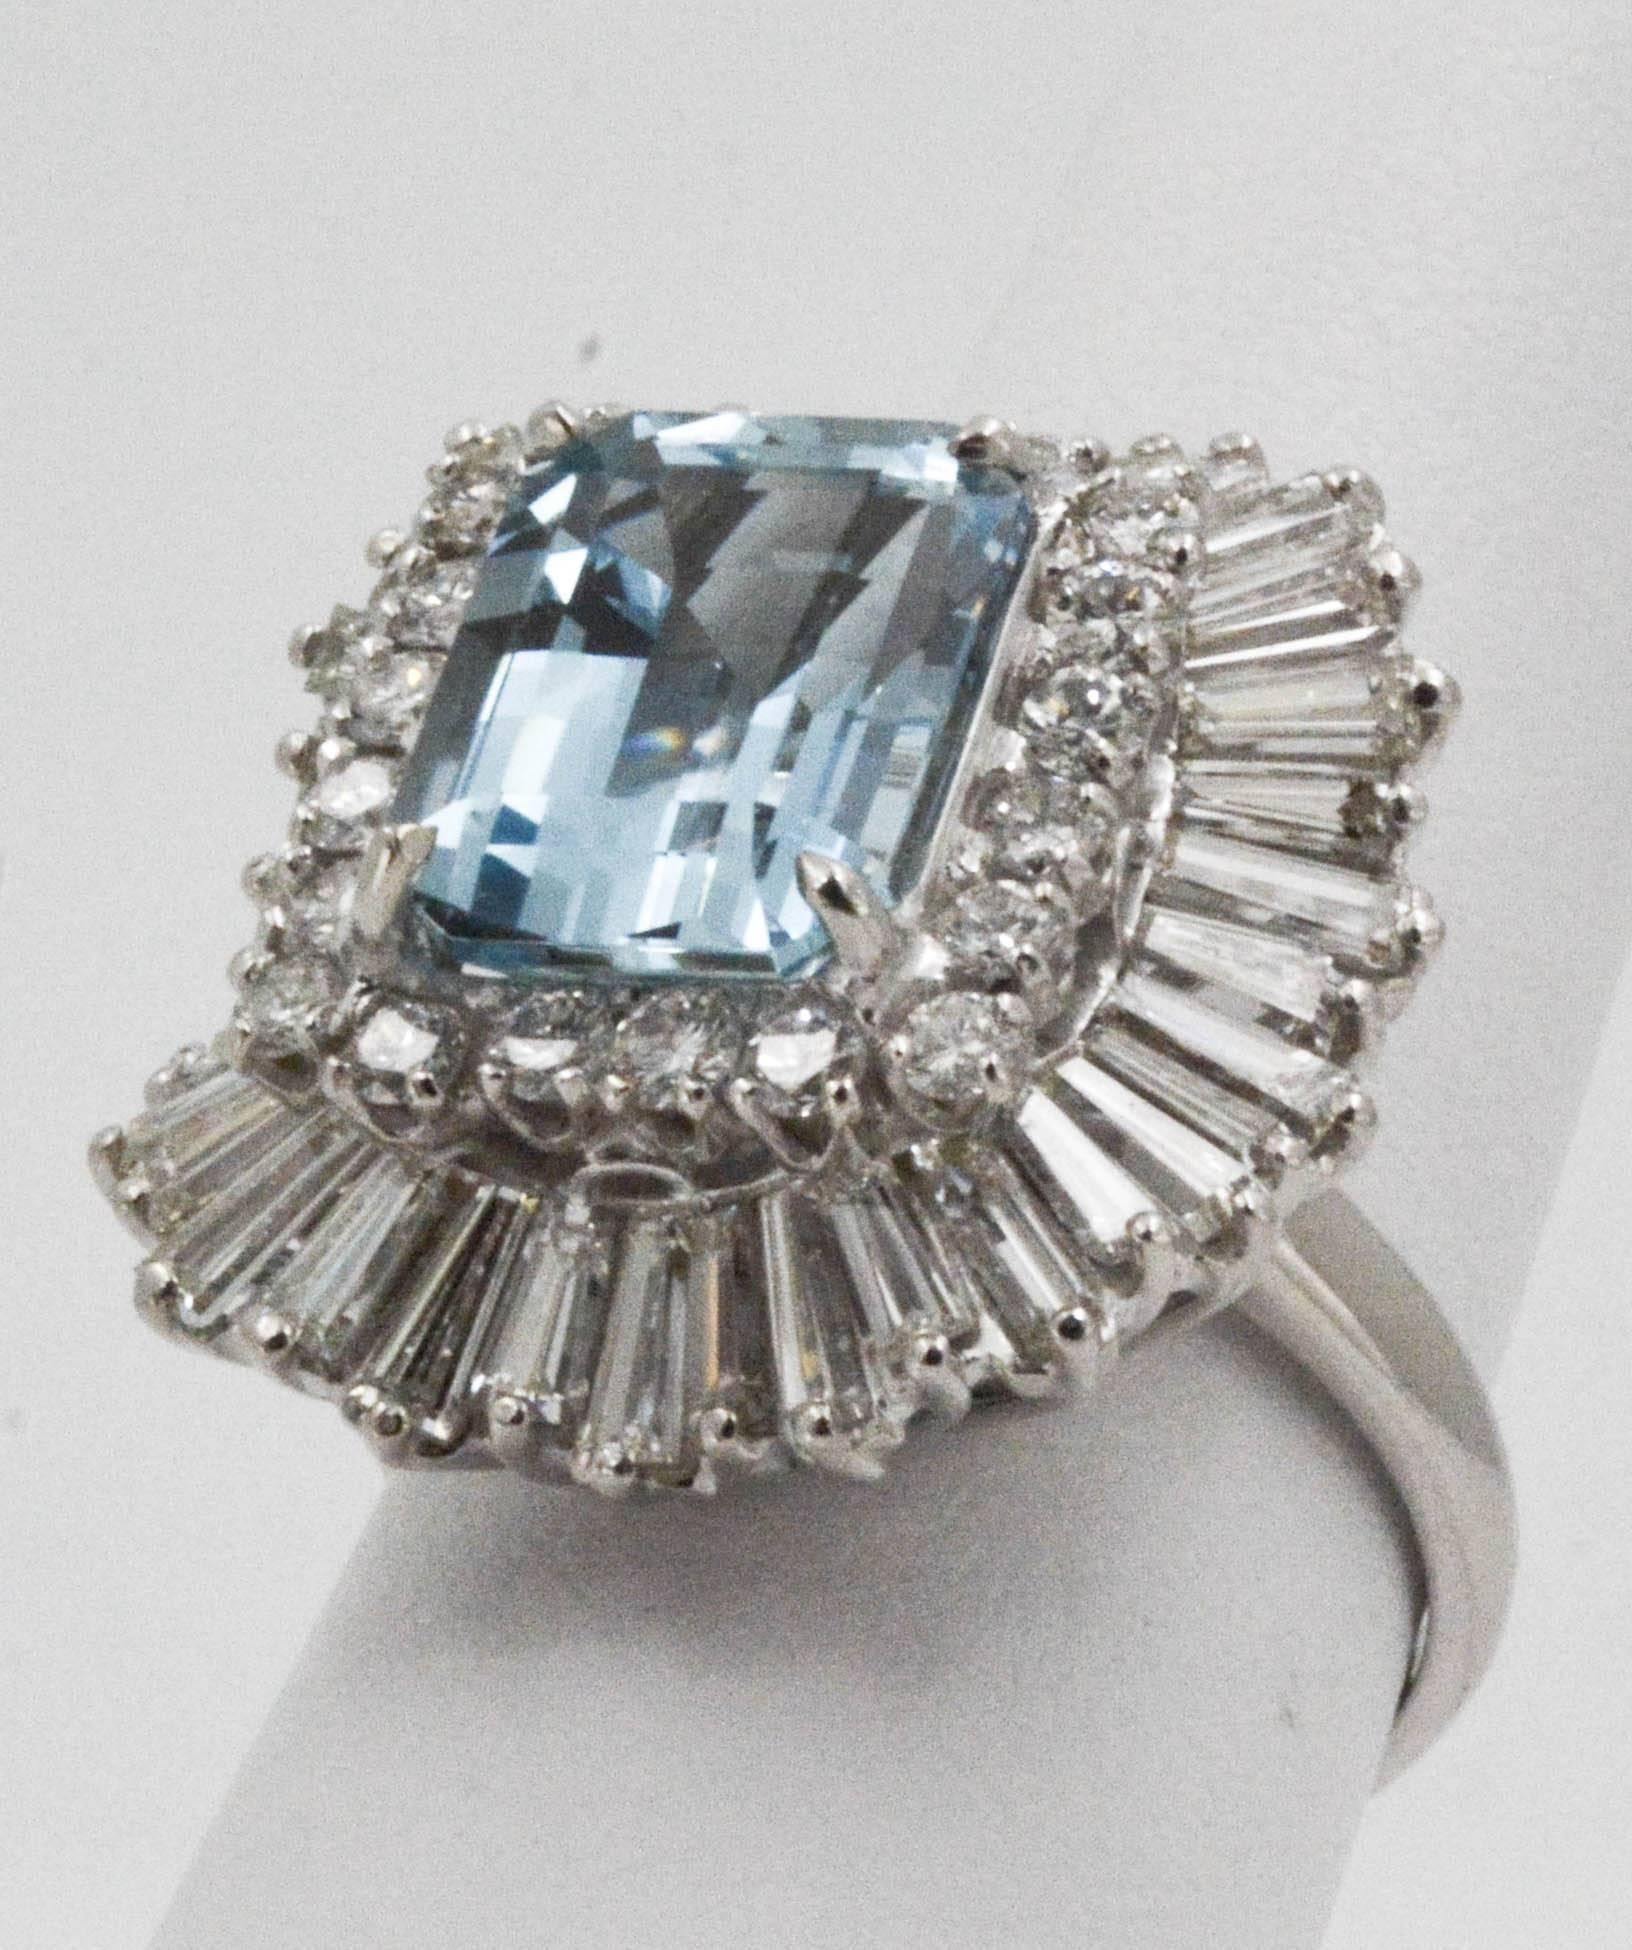 Crystal clear waters would not capture your attention more than this 4.51 ctw emerald cut Aquamarine. Its universal appeal in soft blue is complemented with 20 round brilliant cut diamonds and 40 tapered bagguette diamonds (3.75 carat total weight,